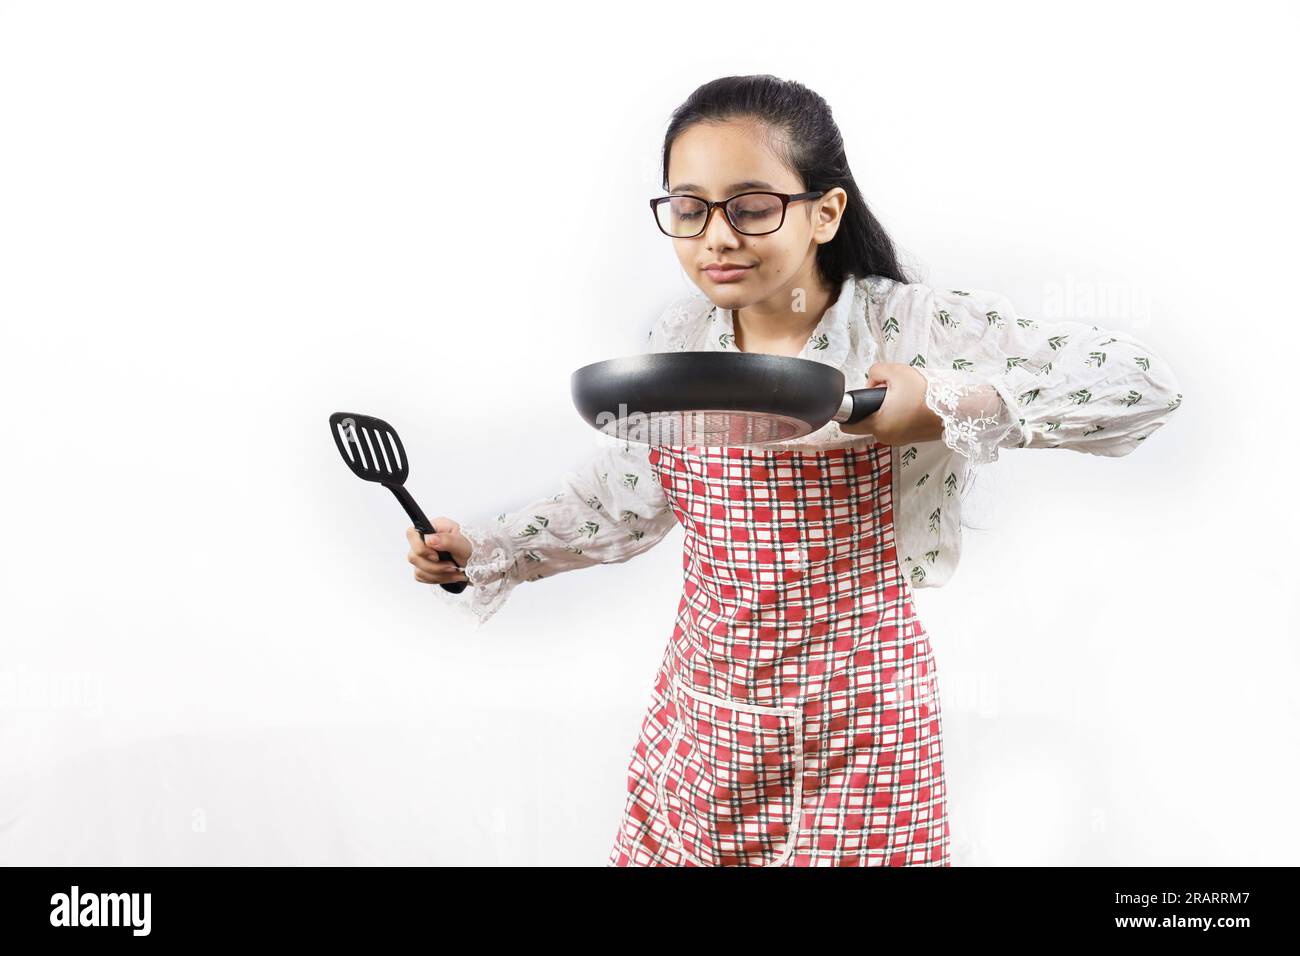 https://c8.alamy.com/comp/2RARRM7/portrait-of-happy-indian-teenage-girl-in-kitchen-holding-cooking-accessories-rolling-rin-frying-spoon-ladle-frying-pan-joyful-and-cheerful-young-2RARRM7.jpg